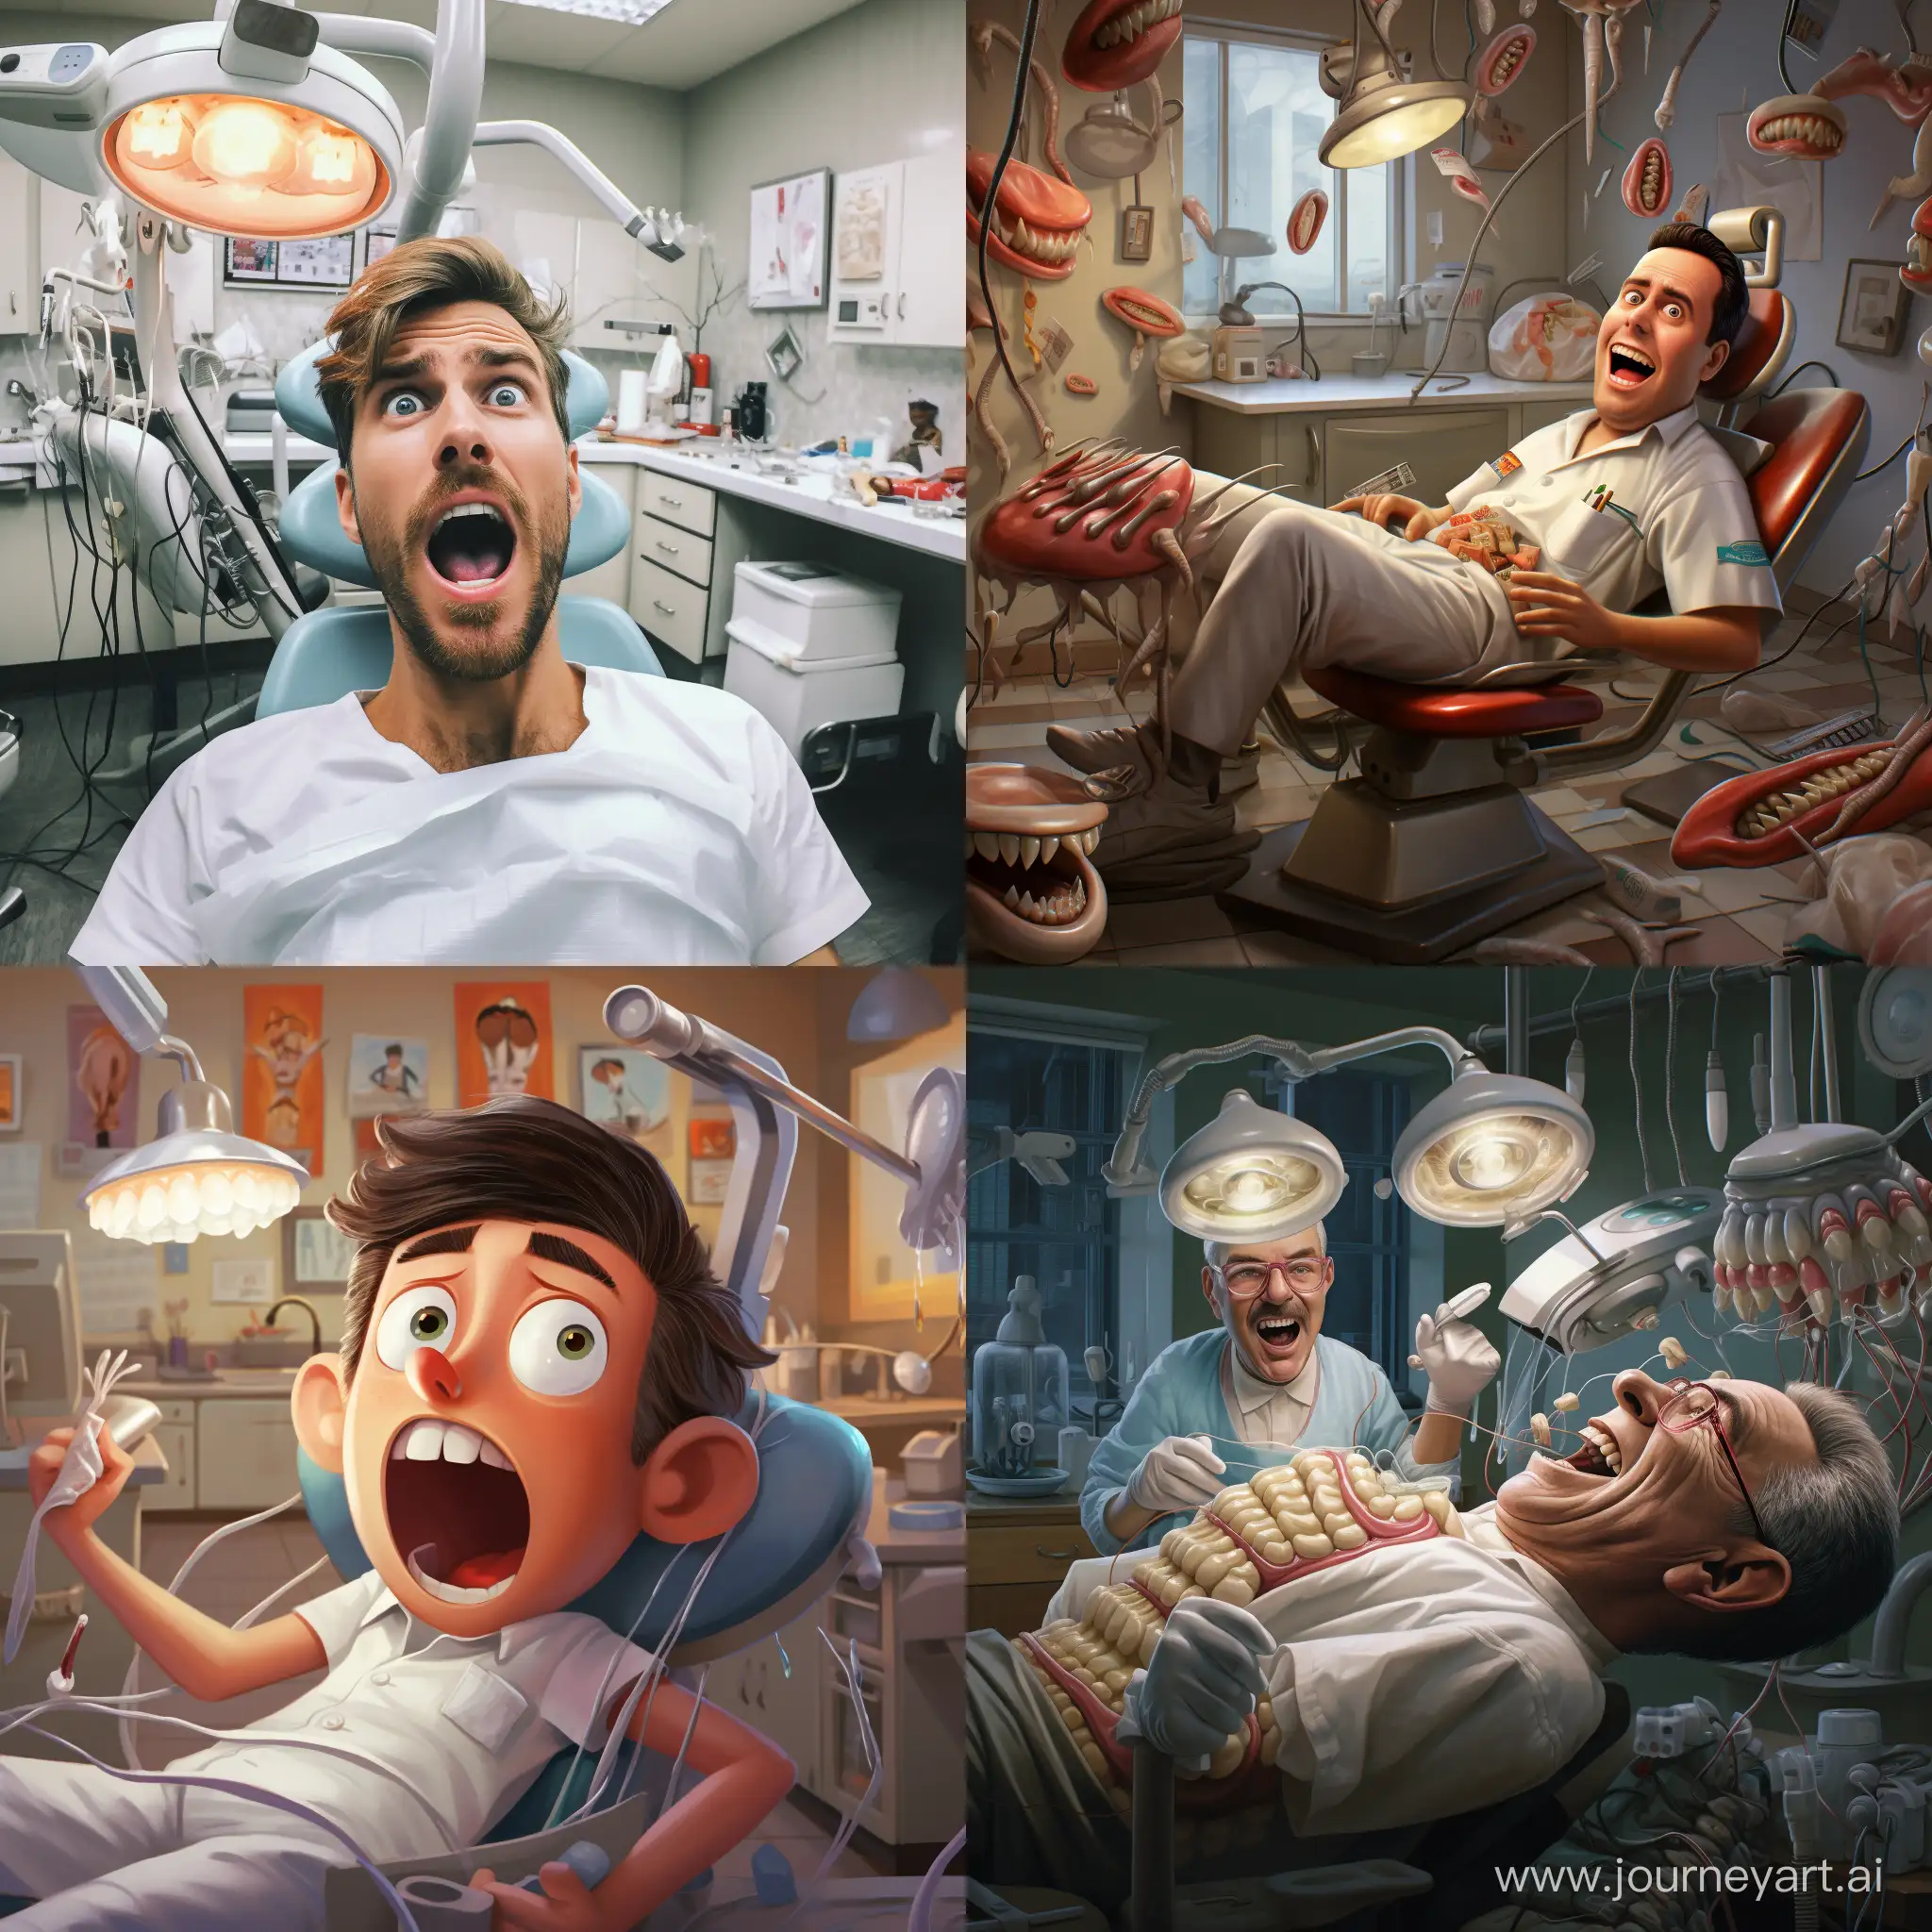 Me when I was a dentist 